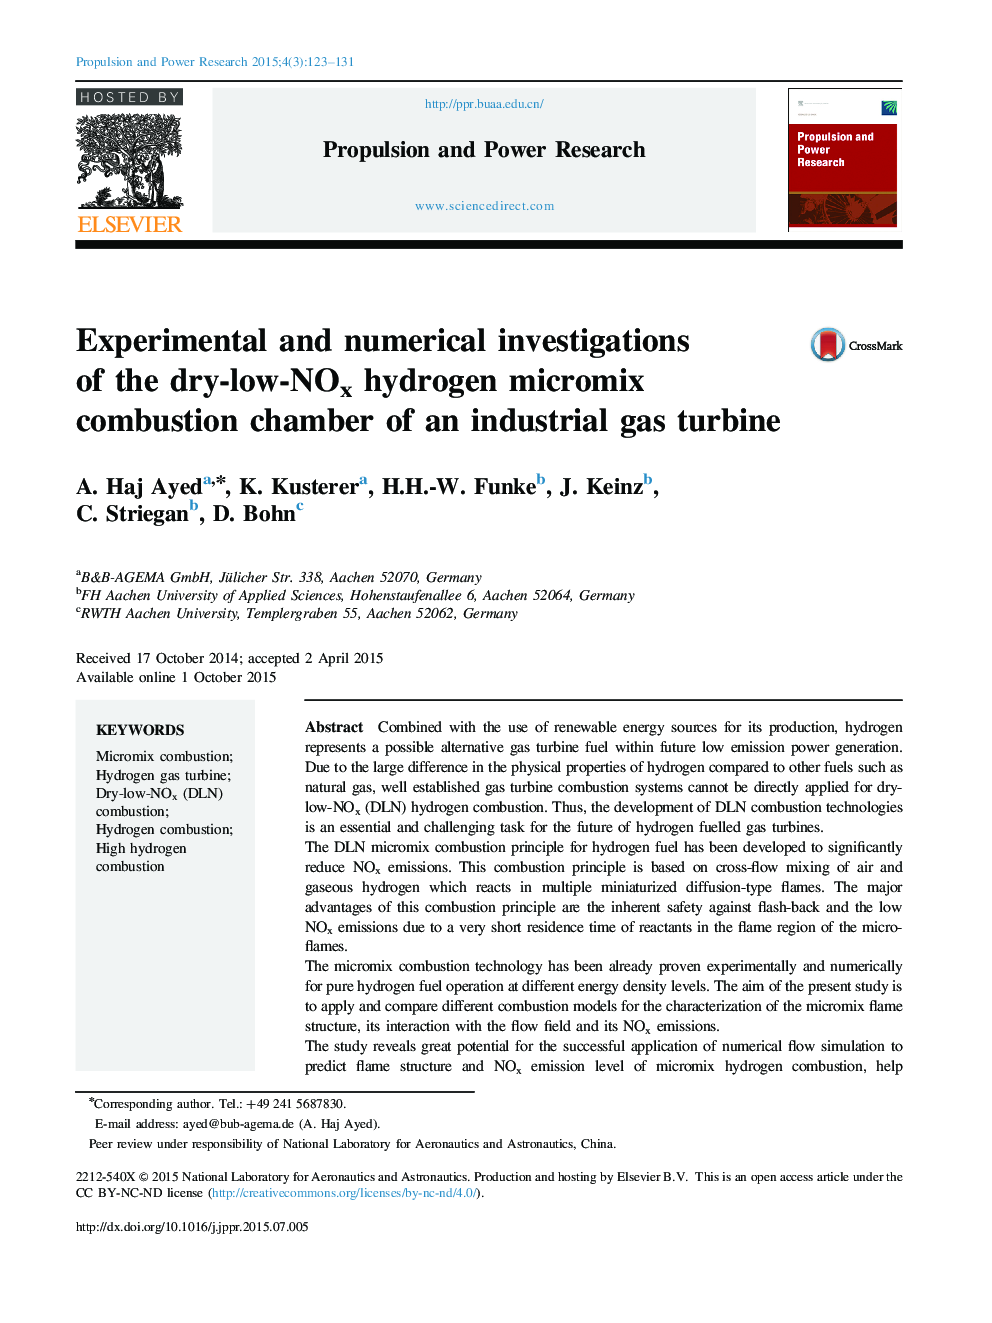 Experimental and numerical investigations of the dry-low-NOx hydrogen micromix combustion chamber of an industrial gas turbine 